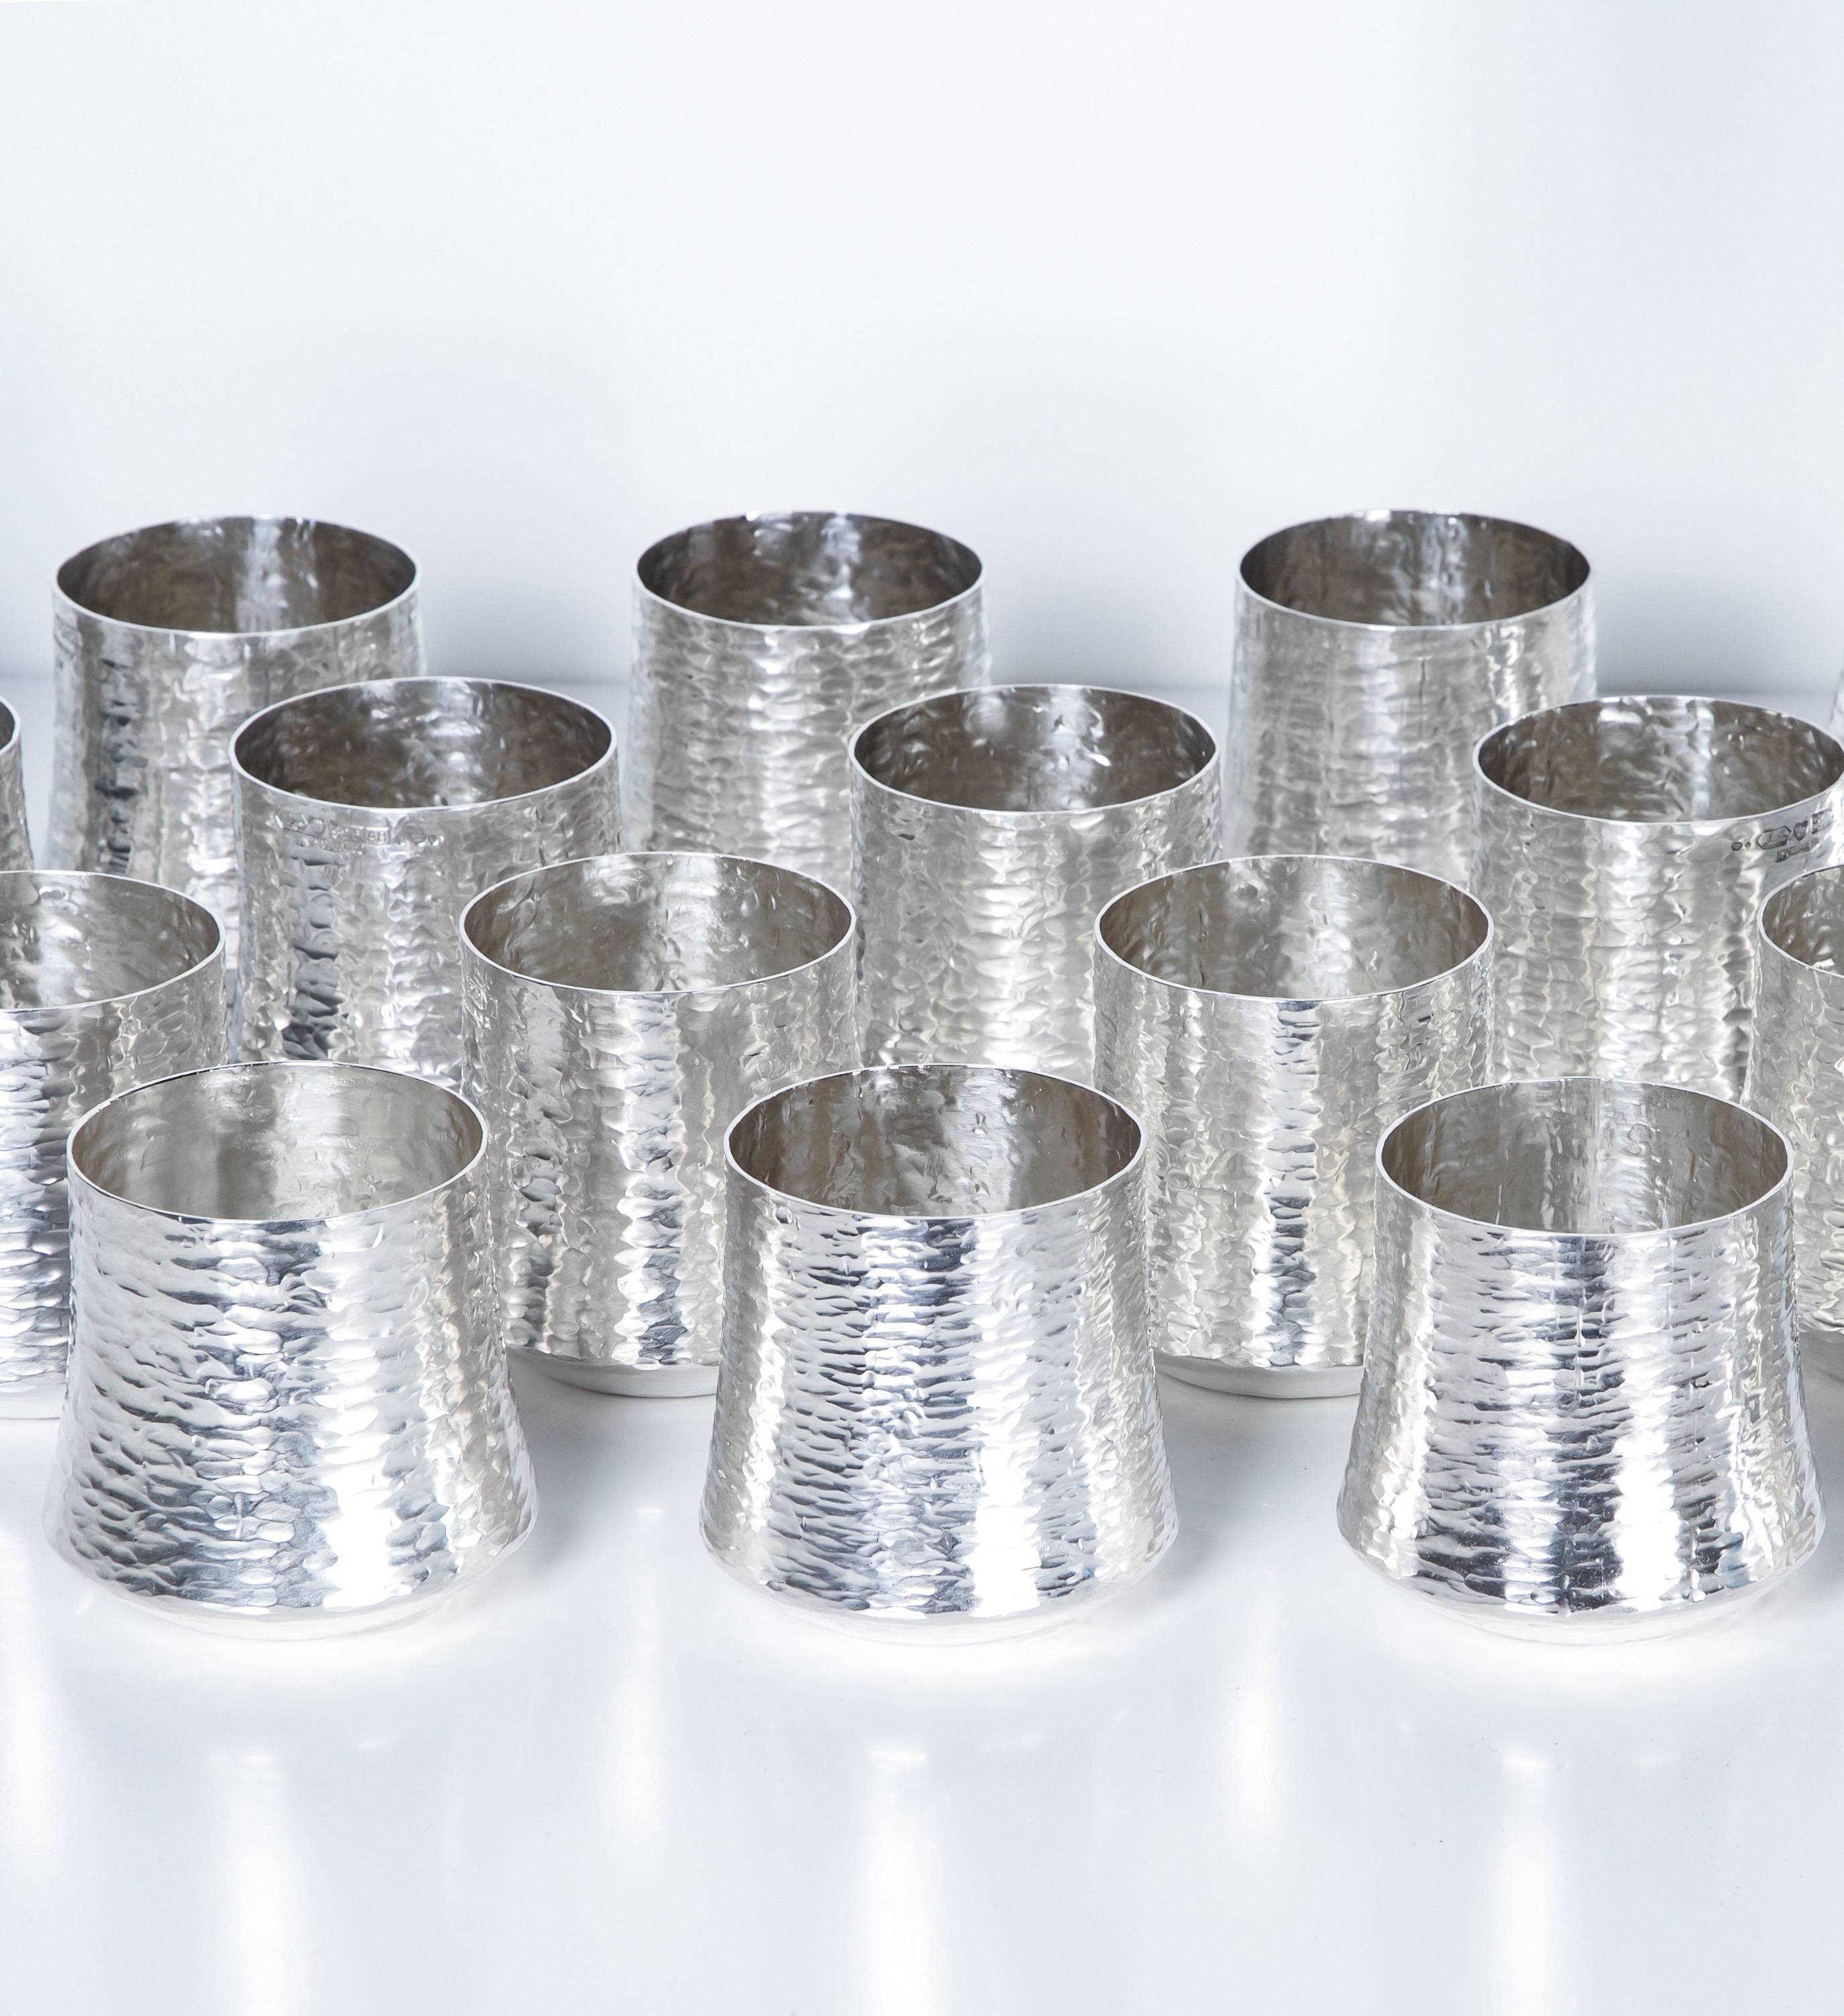 Finnish Tapio Wirkkala, Set of Silver Pitchers and Cups, 18 Pieces, Finland 1970s For Sale